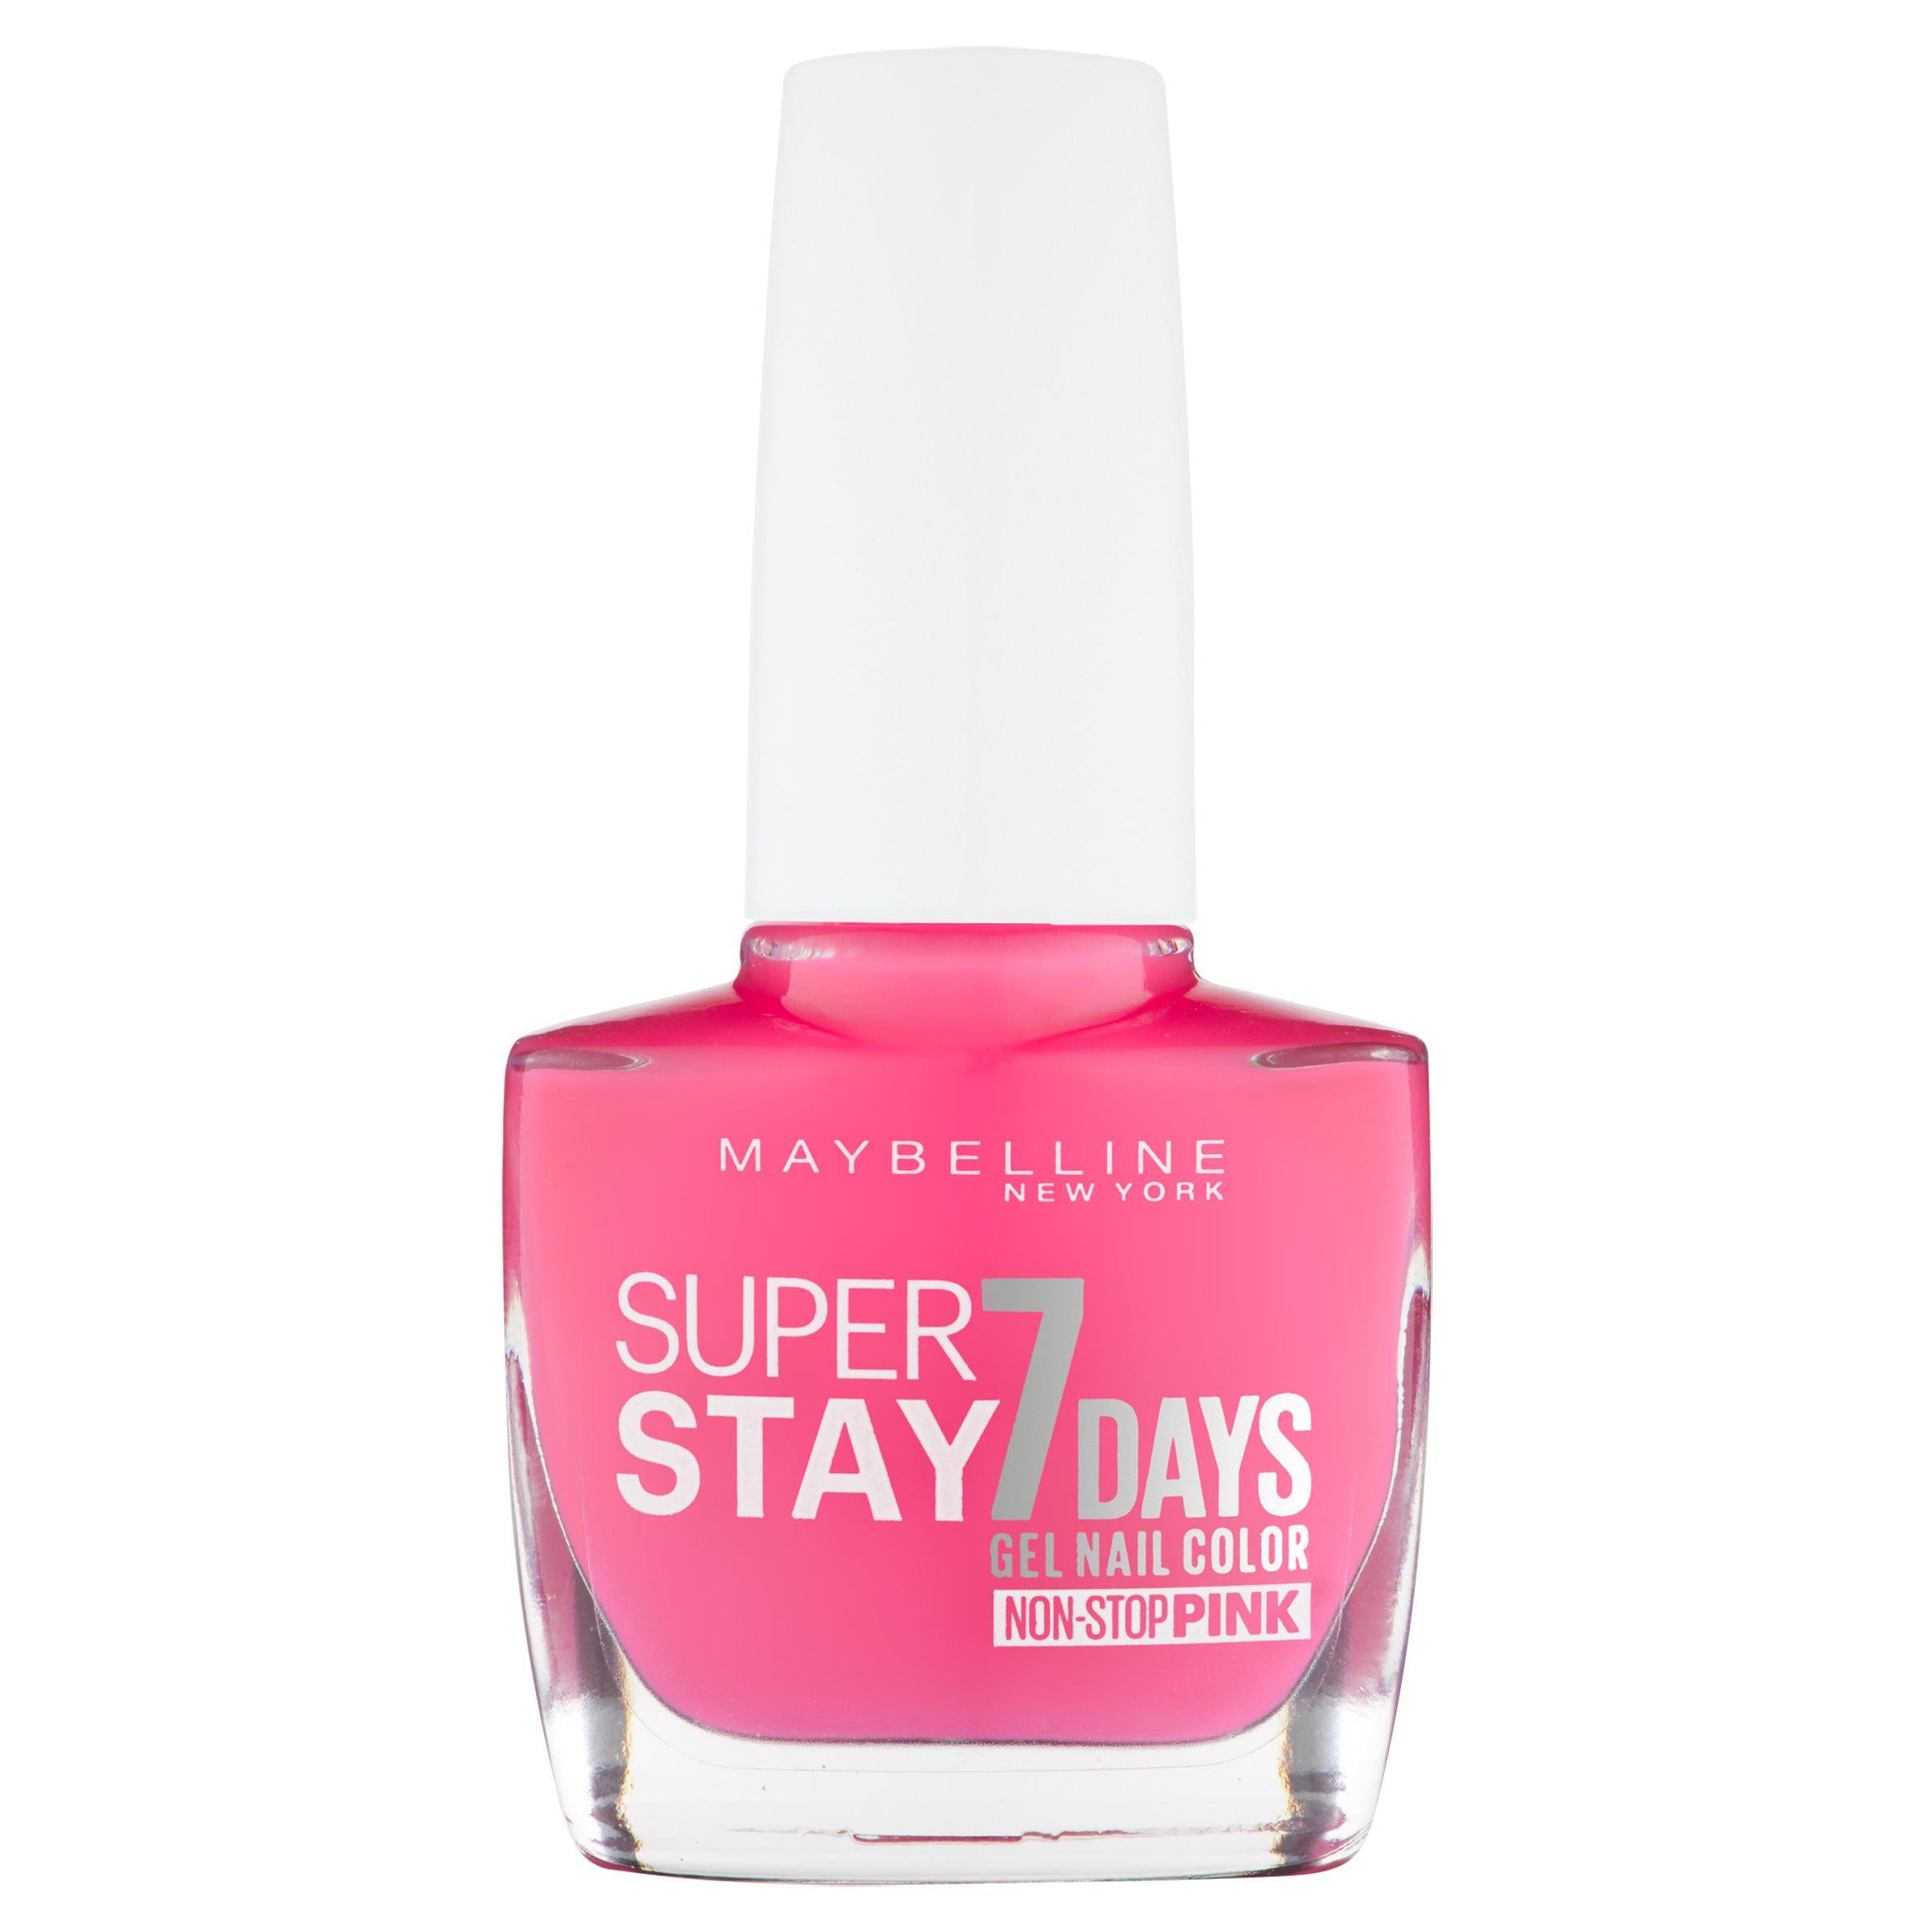 Maybelline Super Stay 7 Days 160 Gel Nail Color Pink 10ml All Sainsburys   